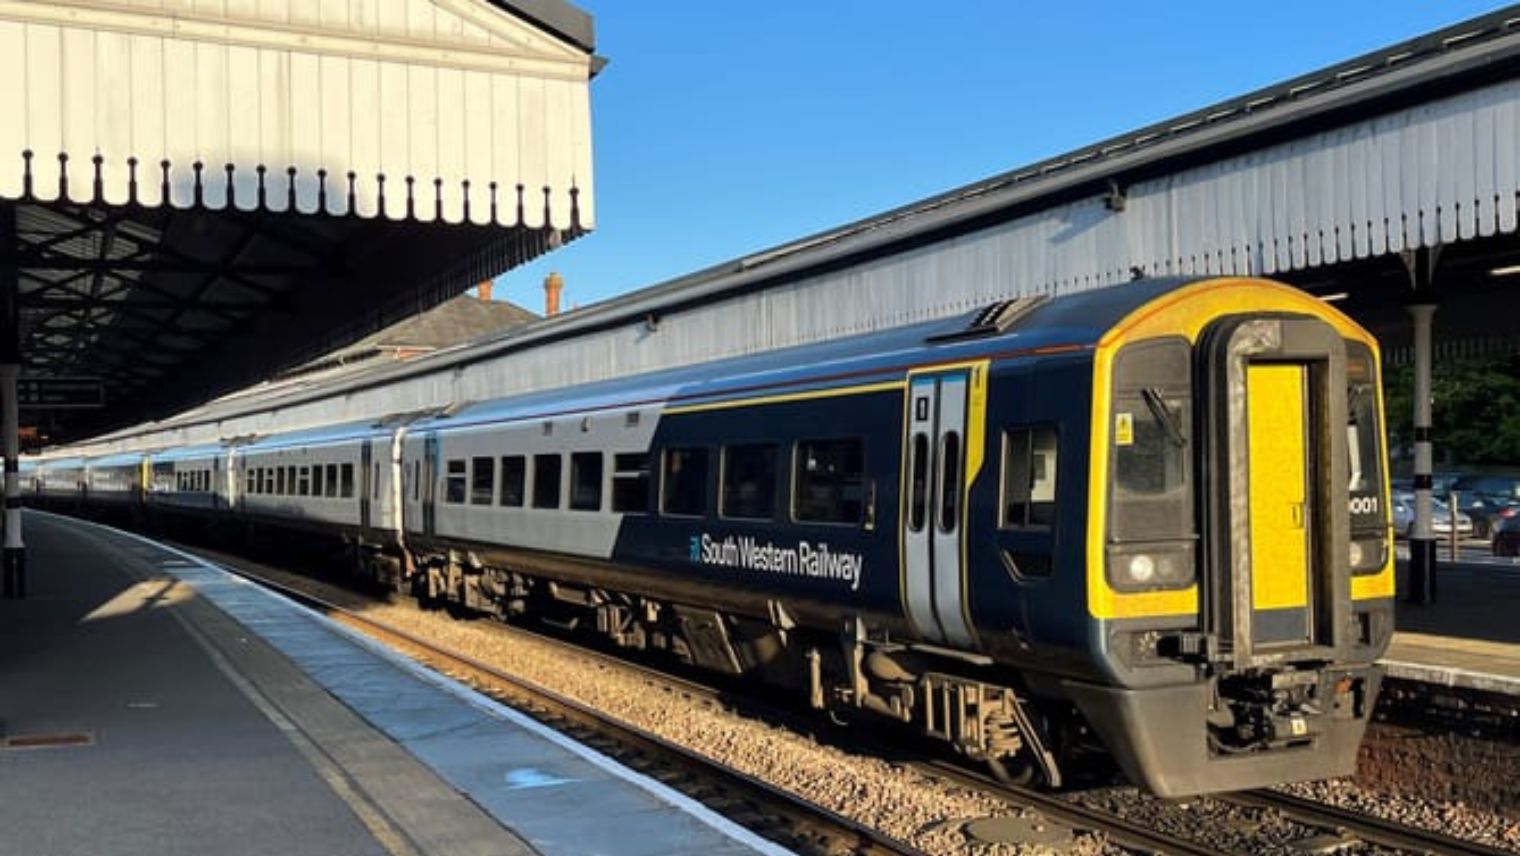 South Western Railway December 2023 timetable will increase the number of direct, weekday services to and from London Waterloo on the West of England Line